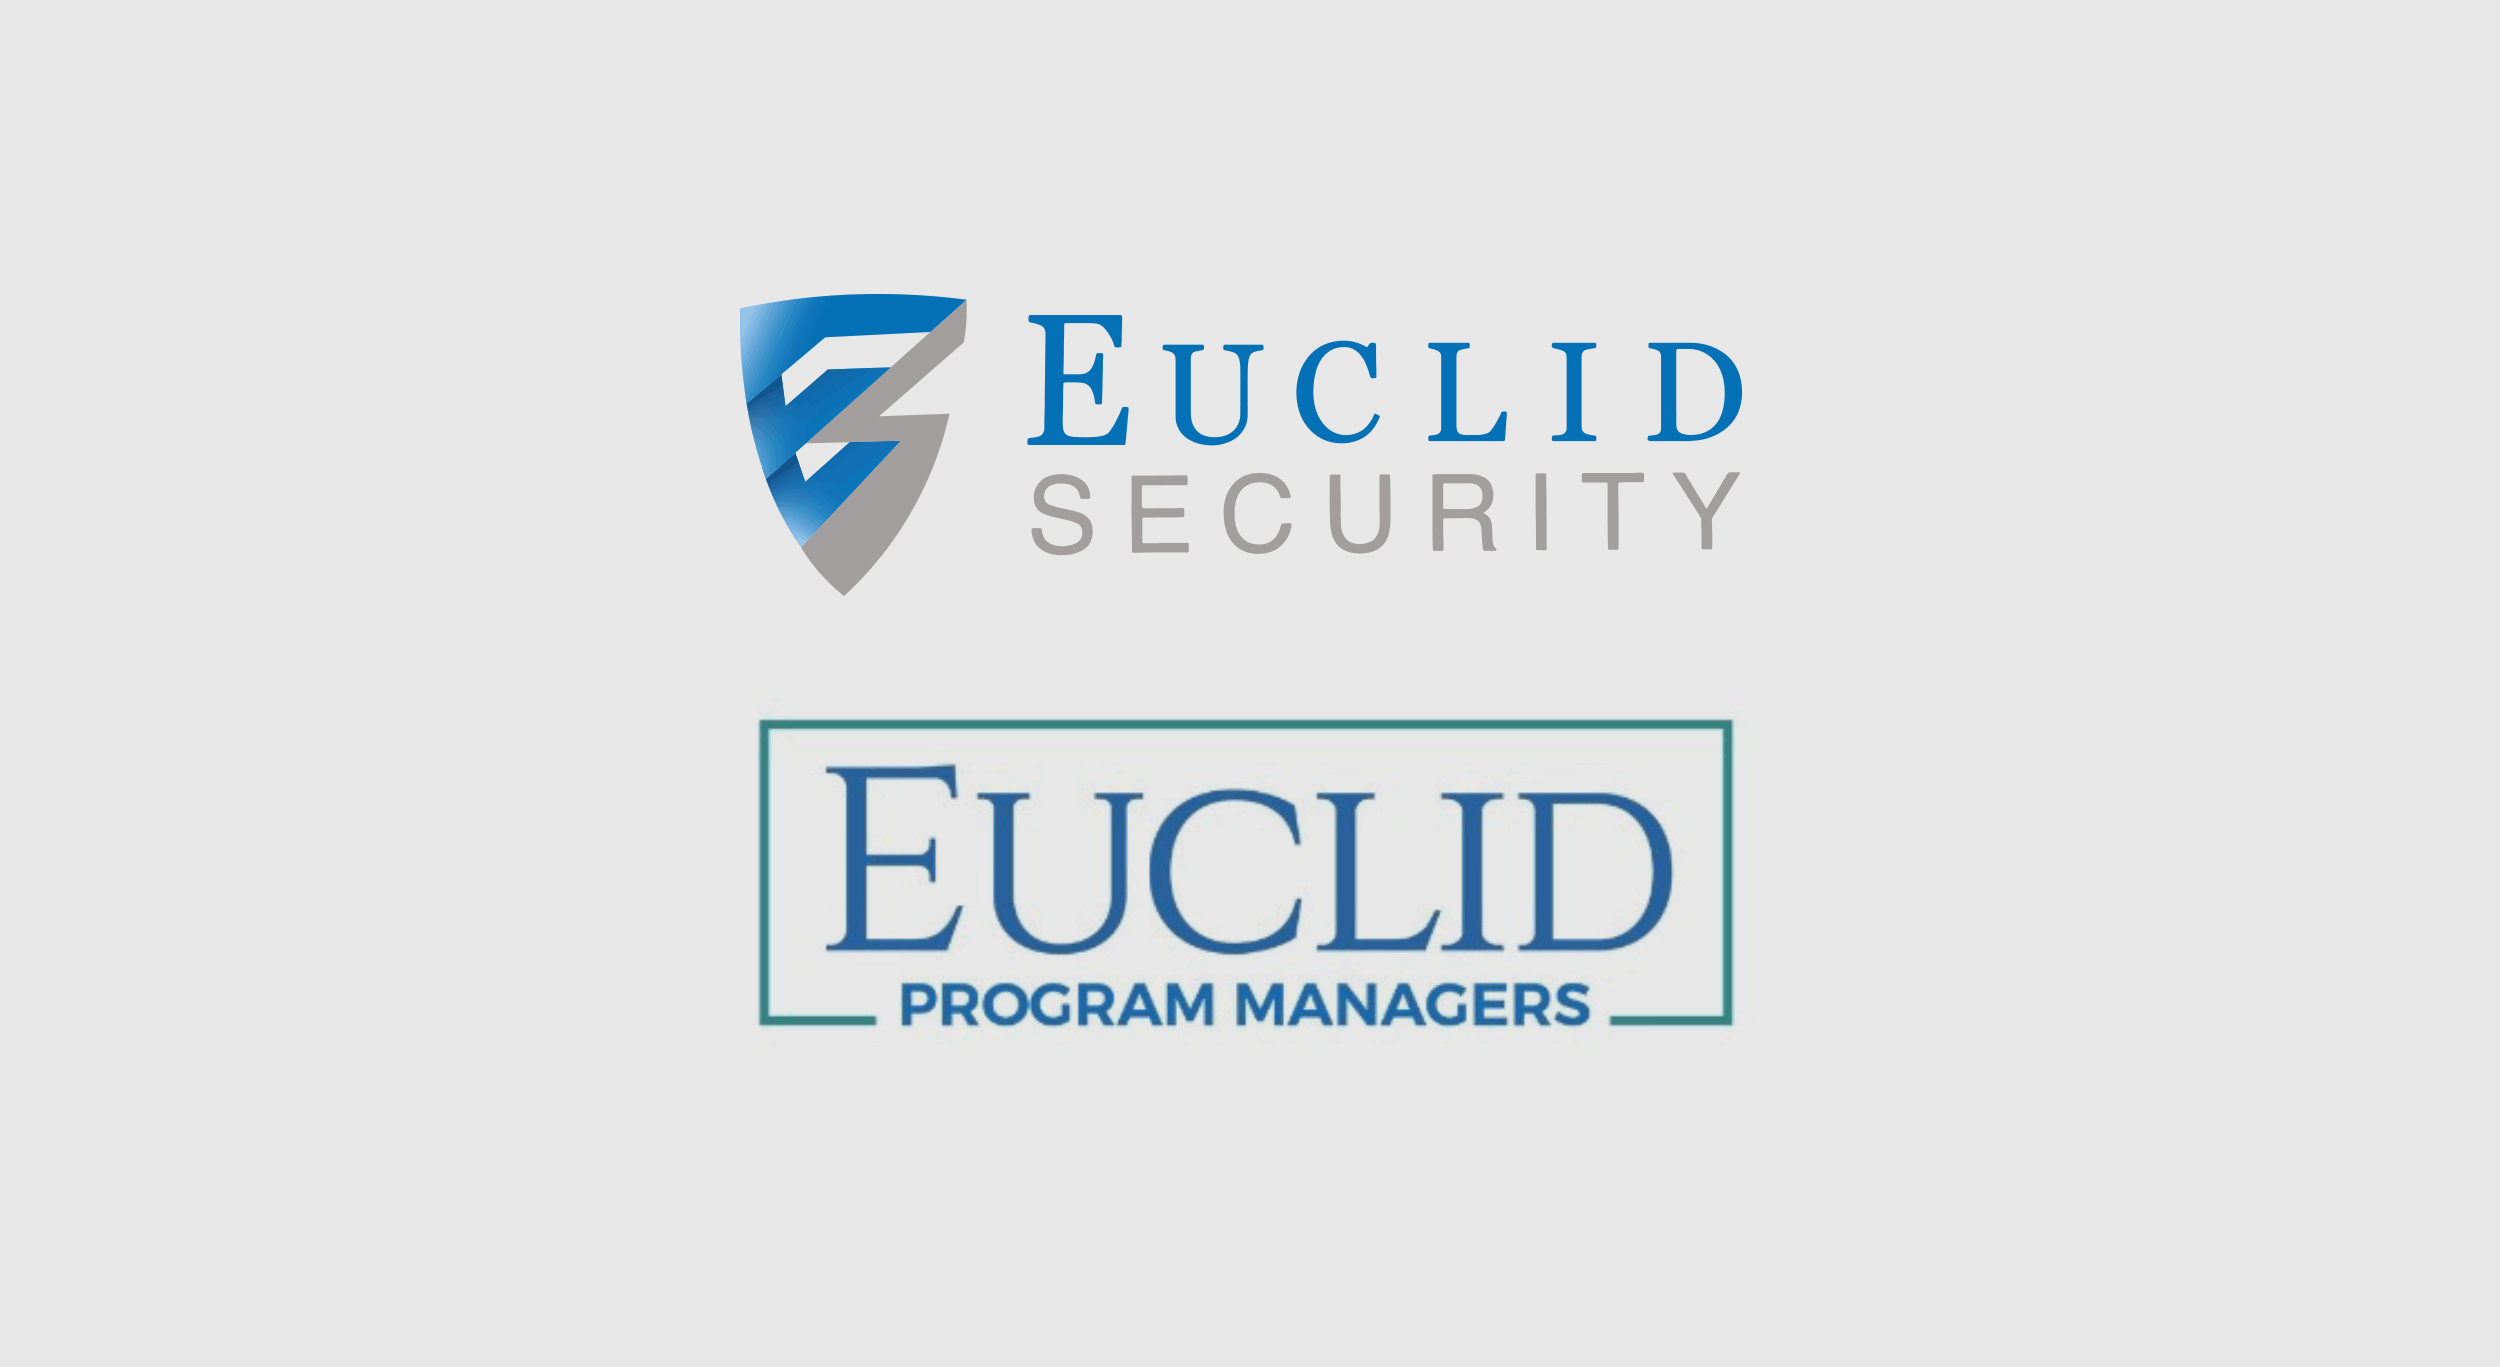 Euclid Security Programs LLC to partner with Euclid Program Managers